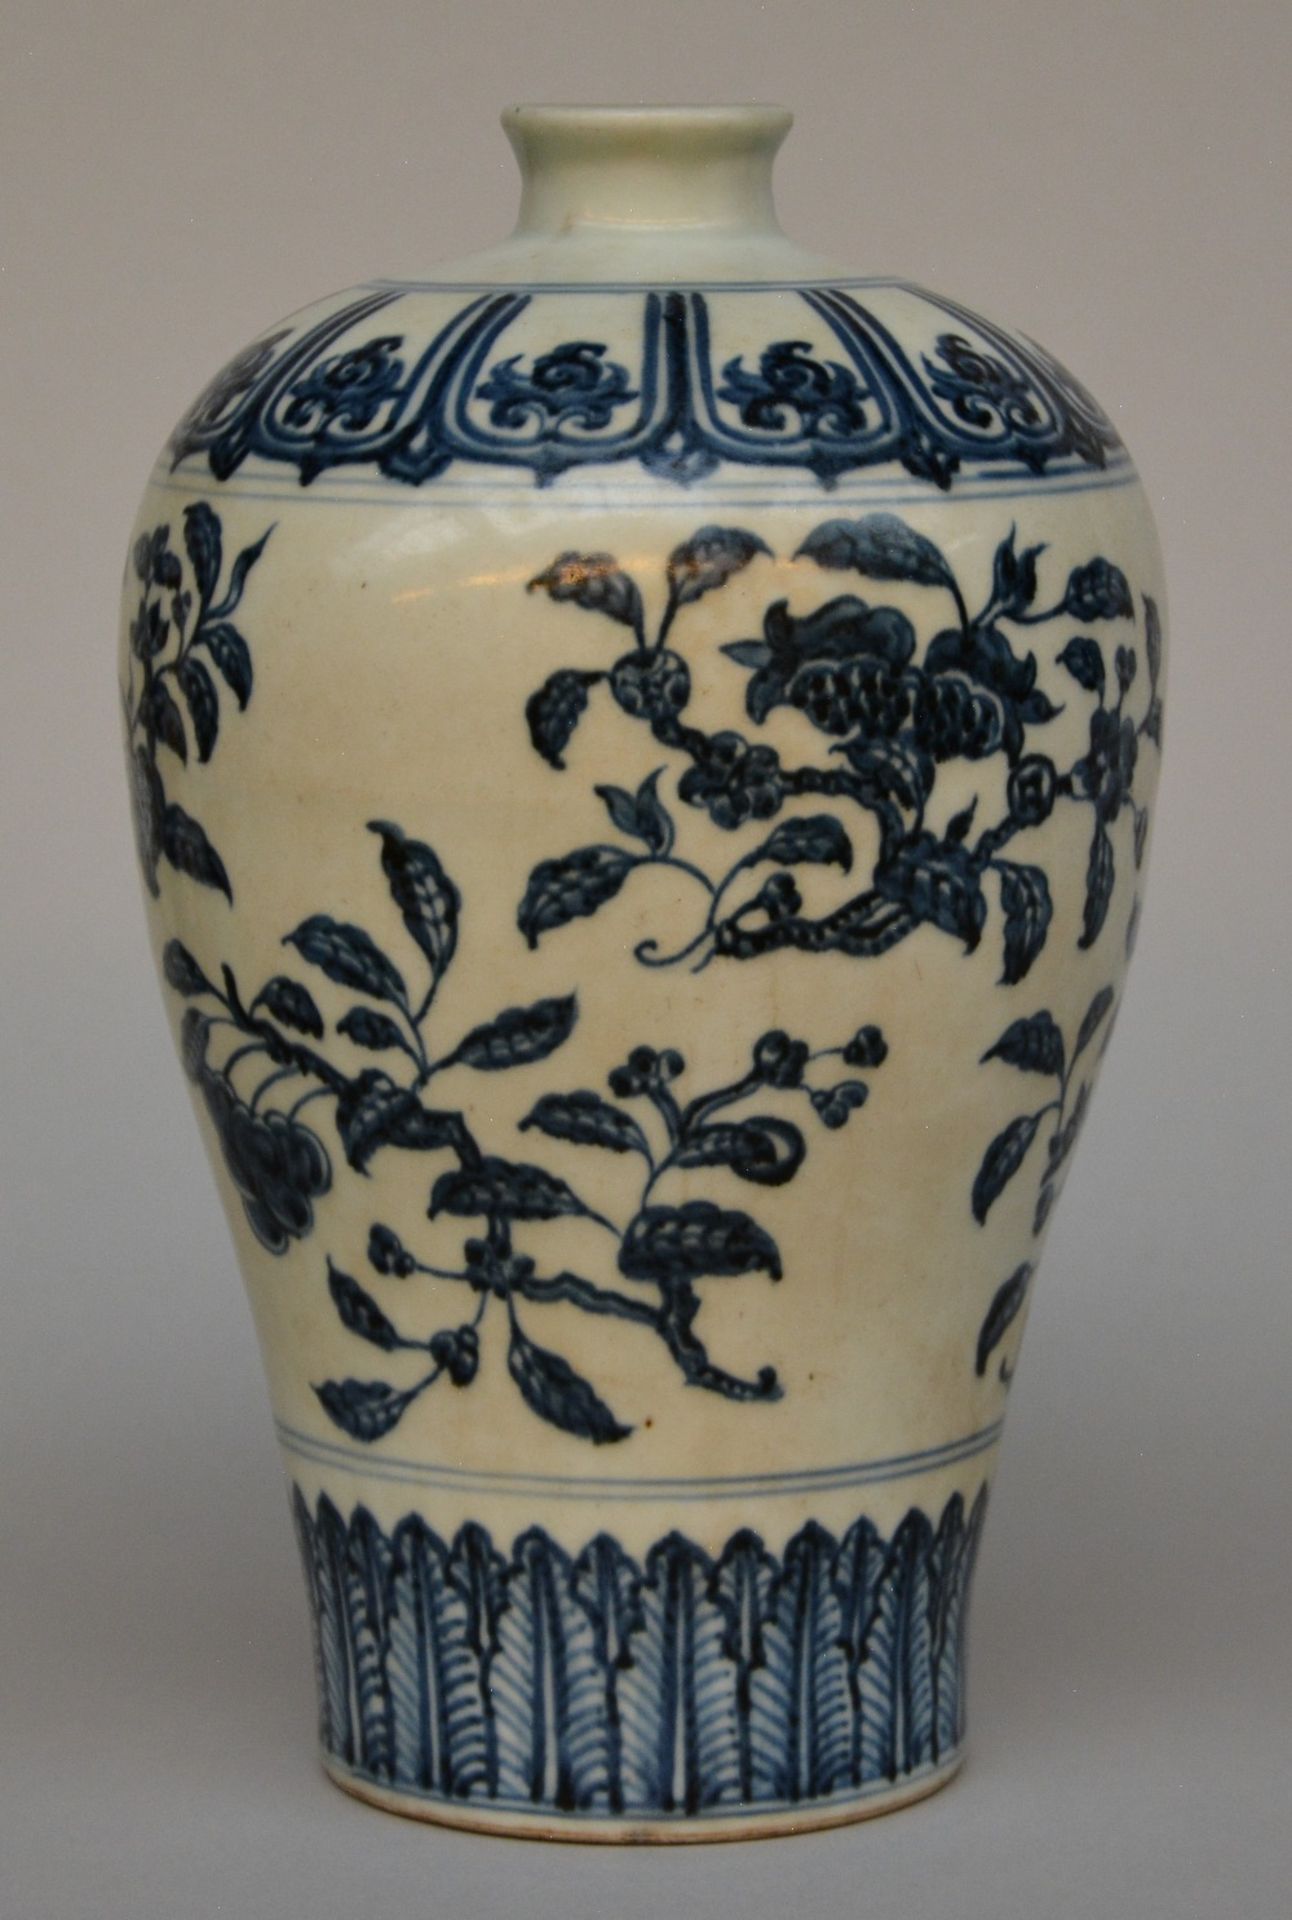 A Chinese blue and white decorated Meiping vase with floral decoration, probably 17thC, H 28,5 cm ( - Bild 2 aus 6